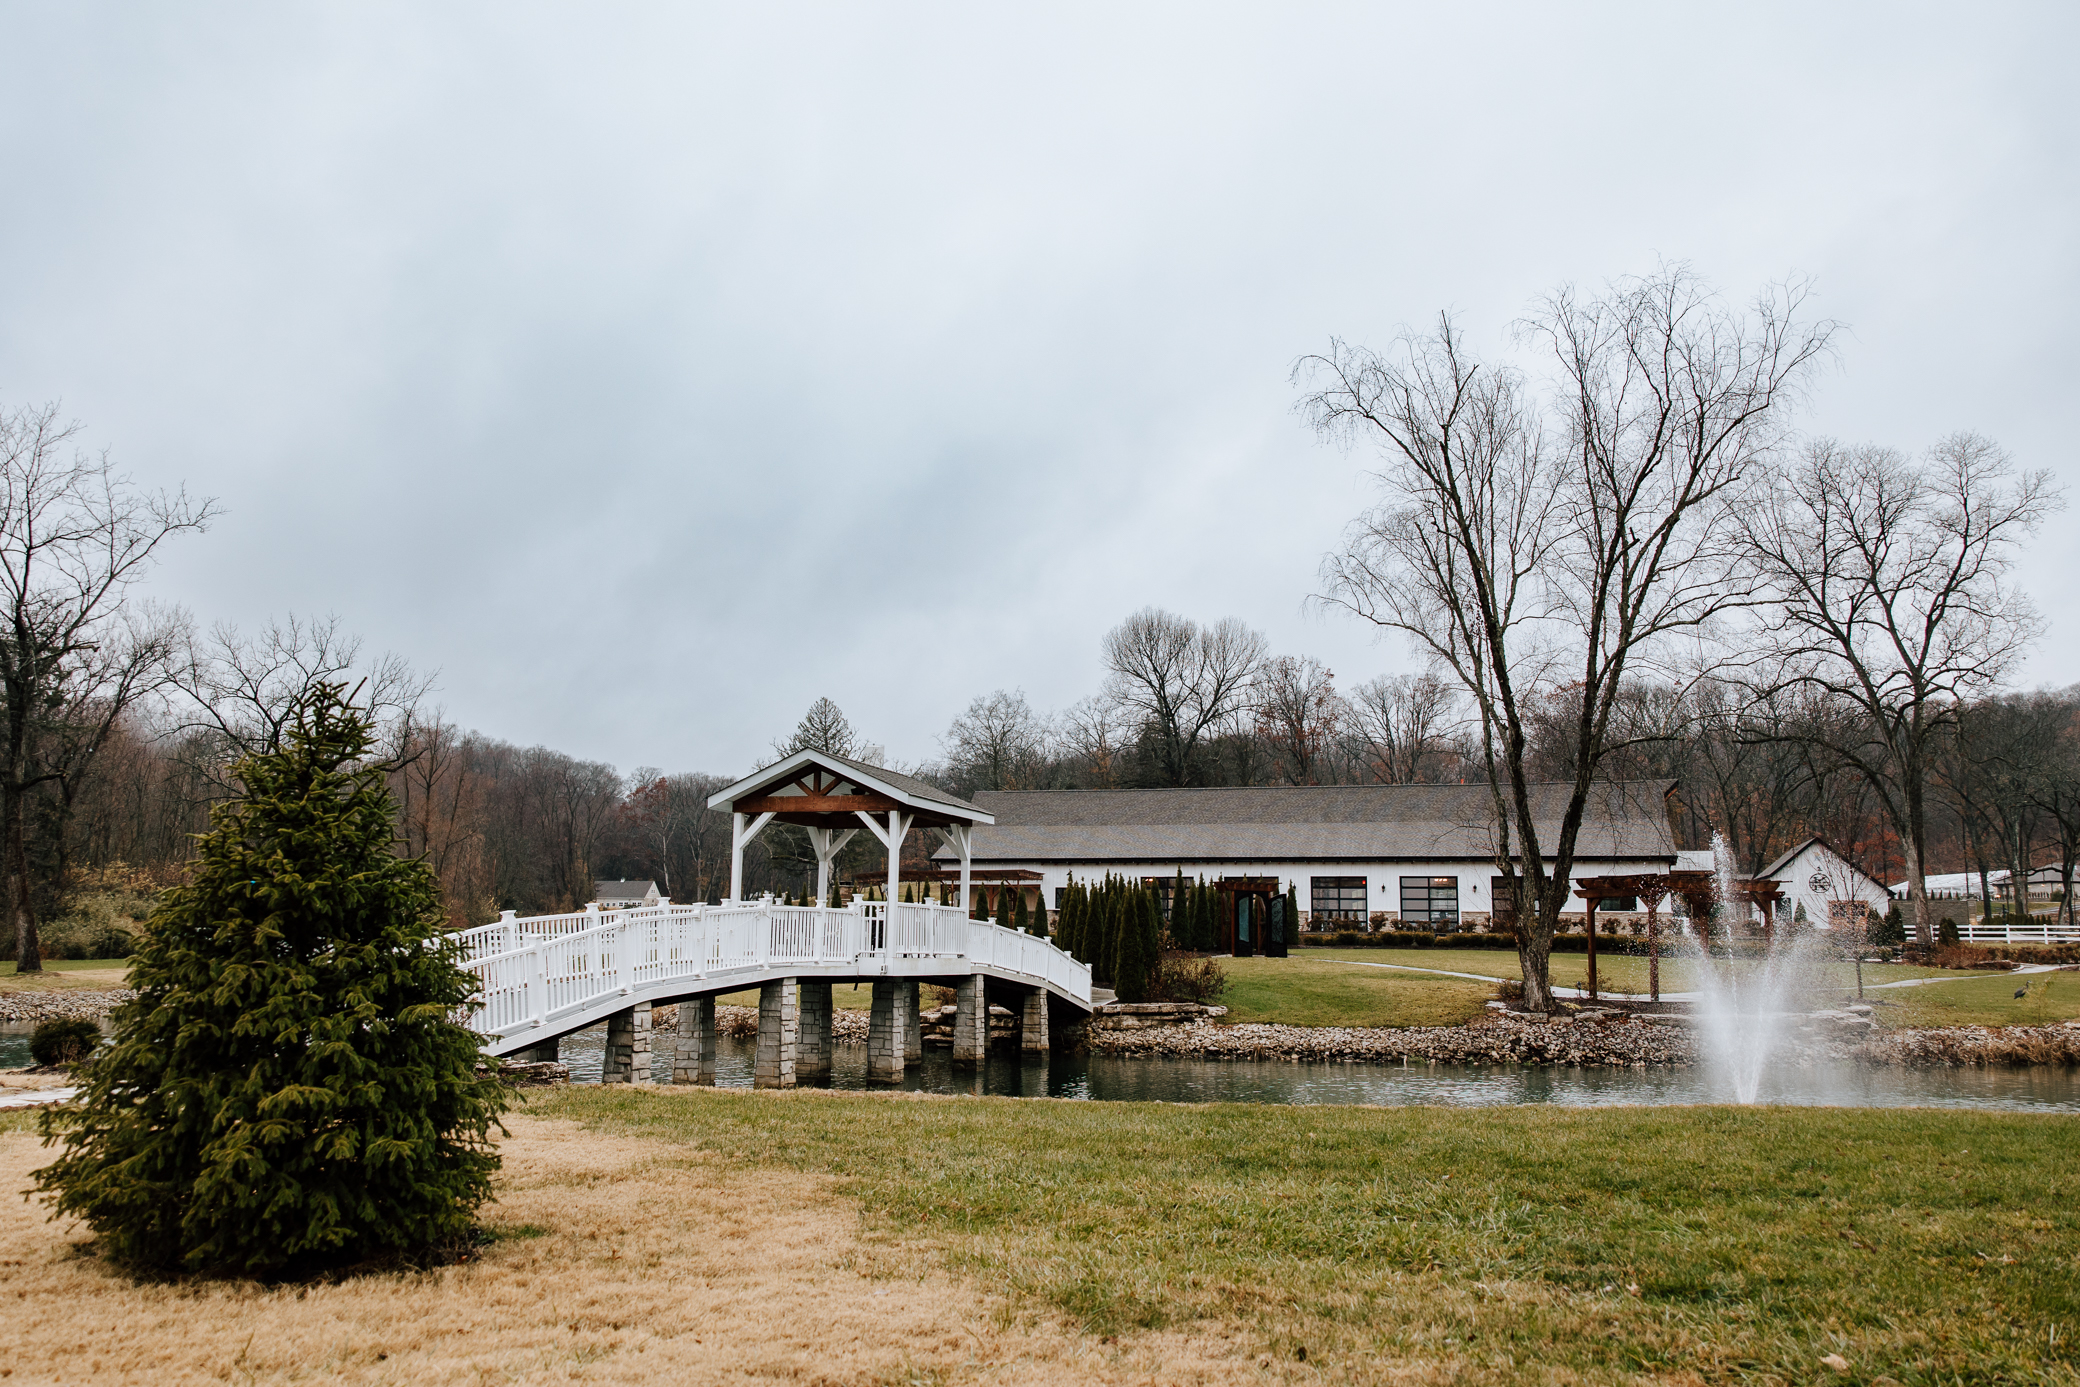 A view of the main venue at Knotting Hills in Pevely, Missouri as seen from the bridal suite. A white wooden bridge is seen directly over the water which connects the bridal suite to the ceremony space and reception hall.